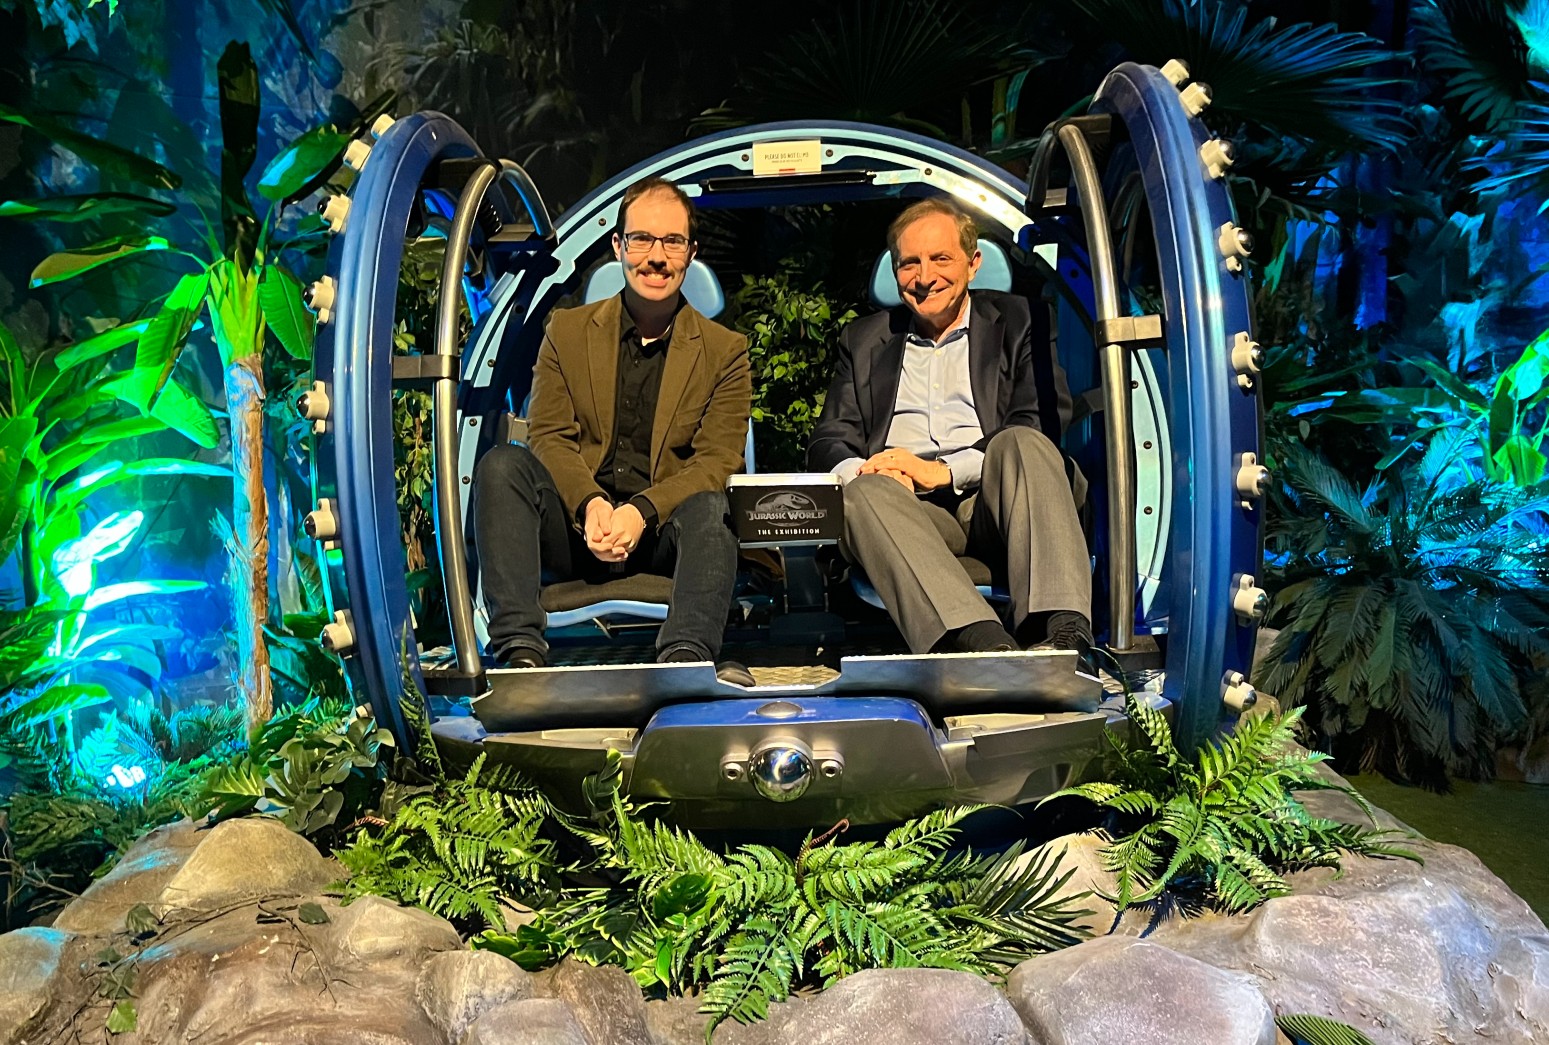 Oakville News reporter Tyler Collins (left) with Universal Experiences and Destinations Global President Micheal Silver (right), seen in a Gyrosphere from the film "Jurassic World".